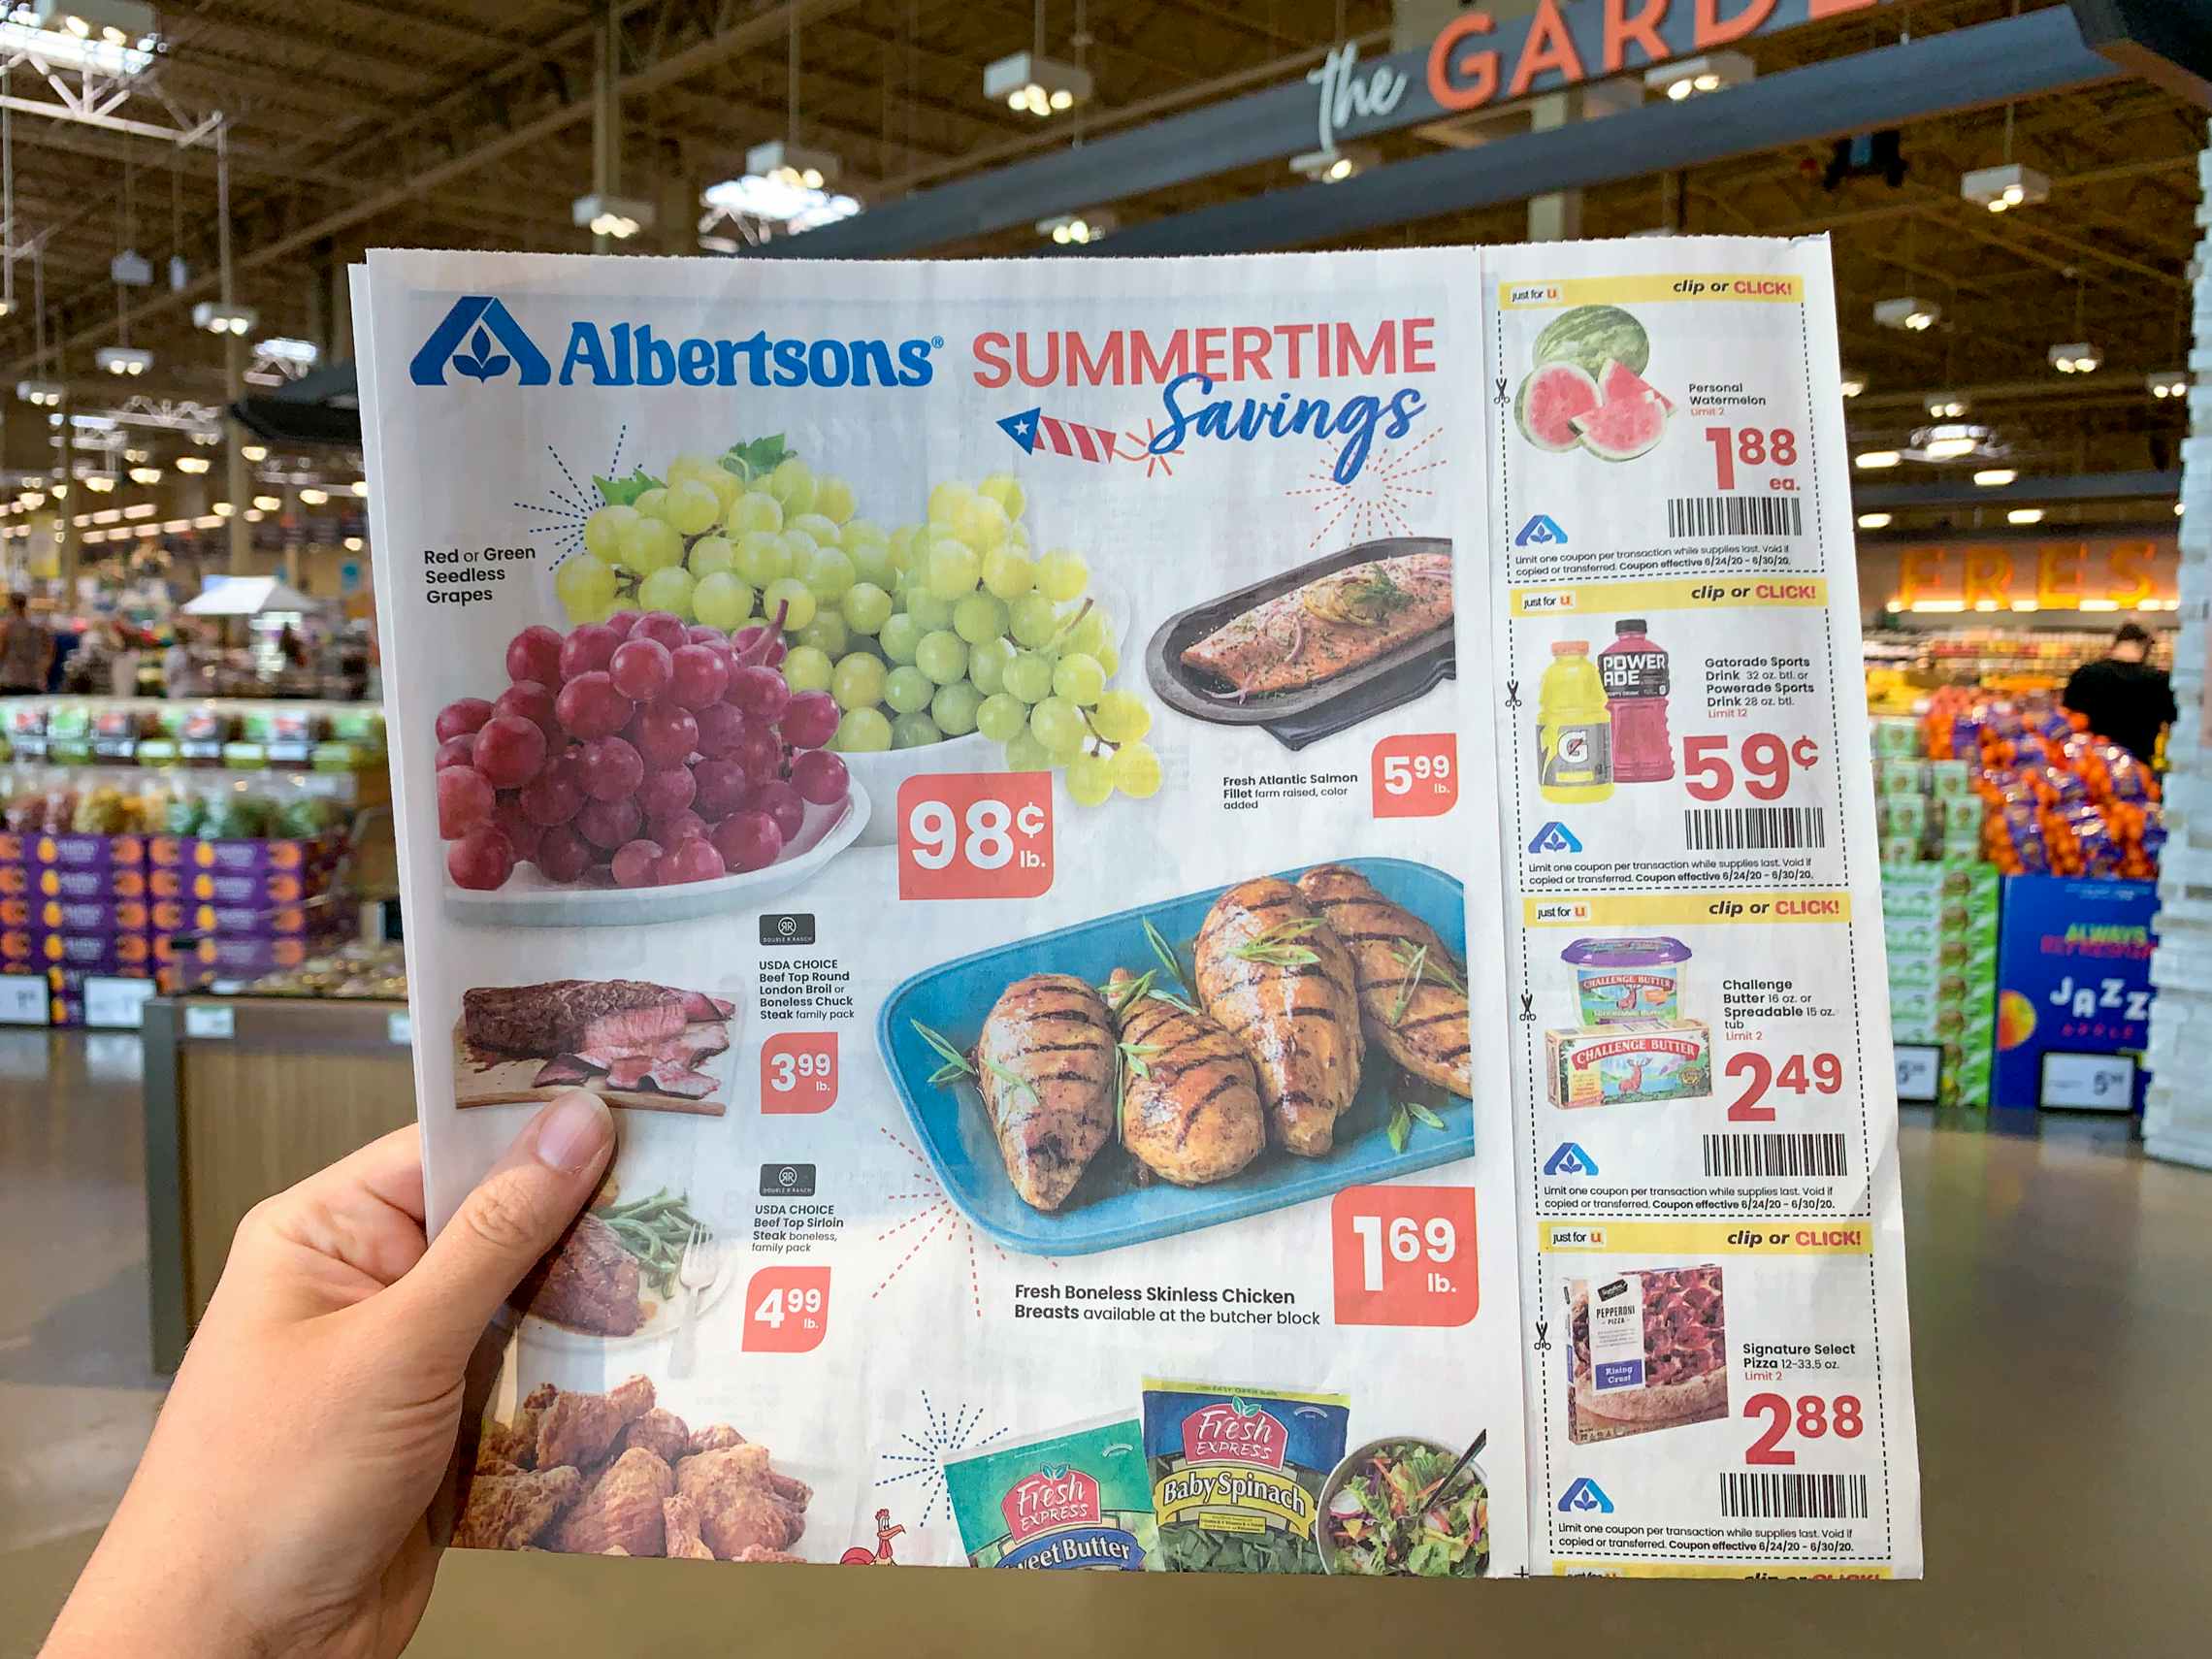 An Albertsons ad with coupons held inside a store.